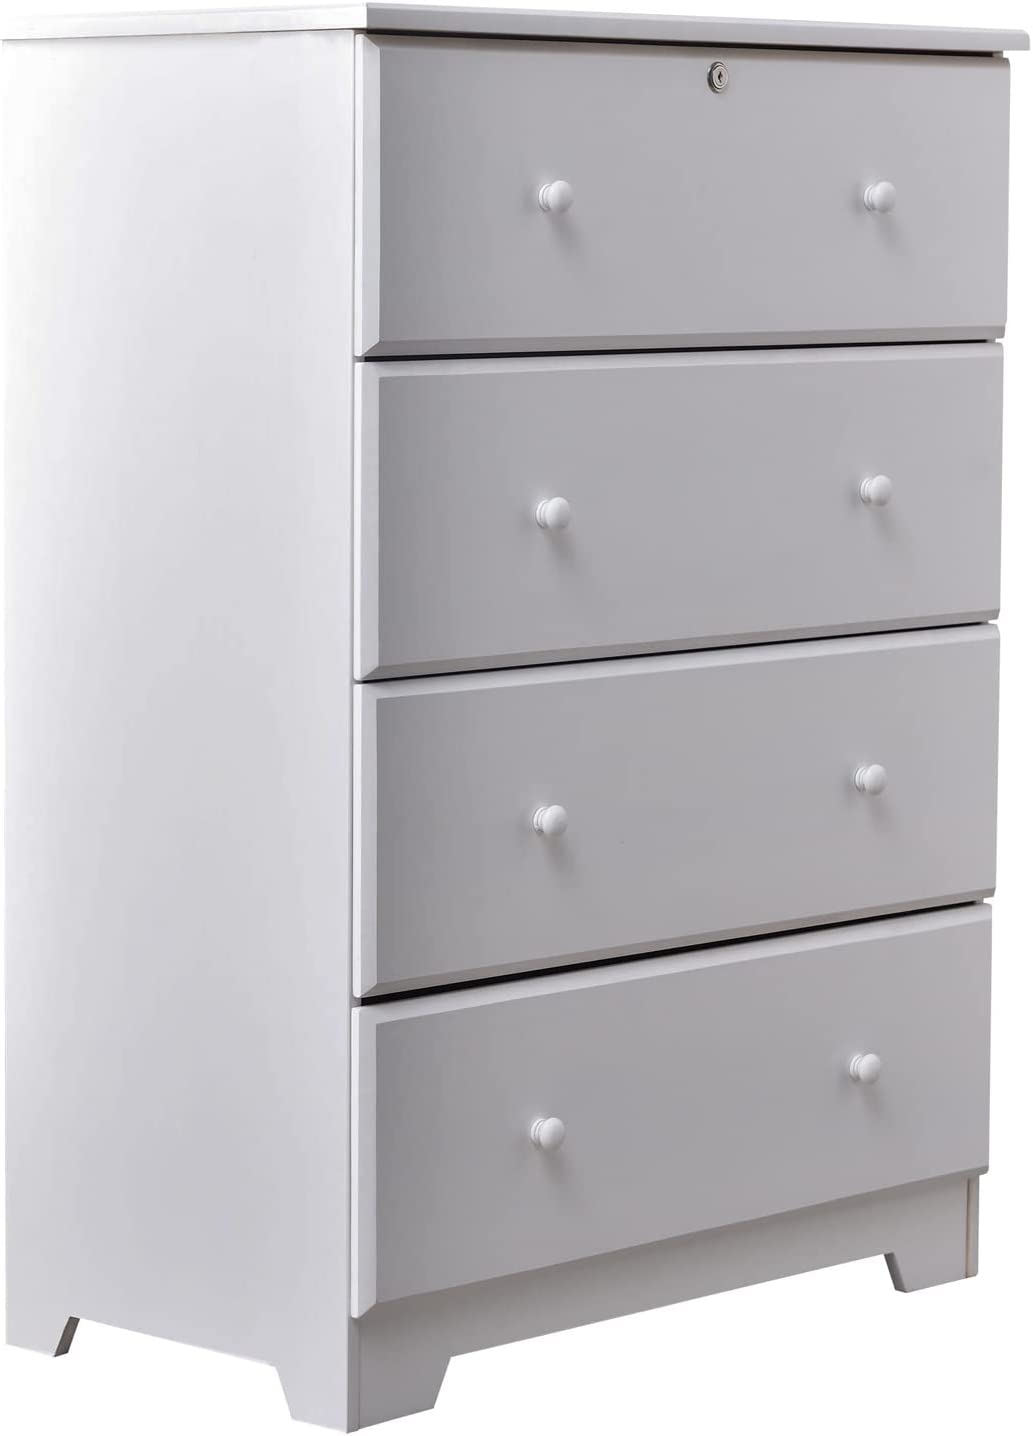 Better Home Products Isabela Solid Pine Wood 4 Drawer Chest Dresser in White